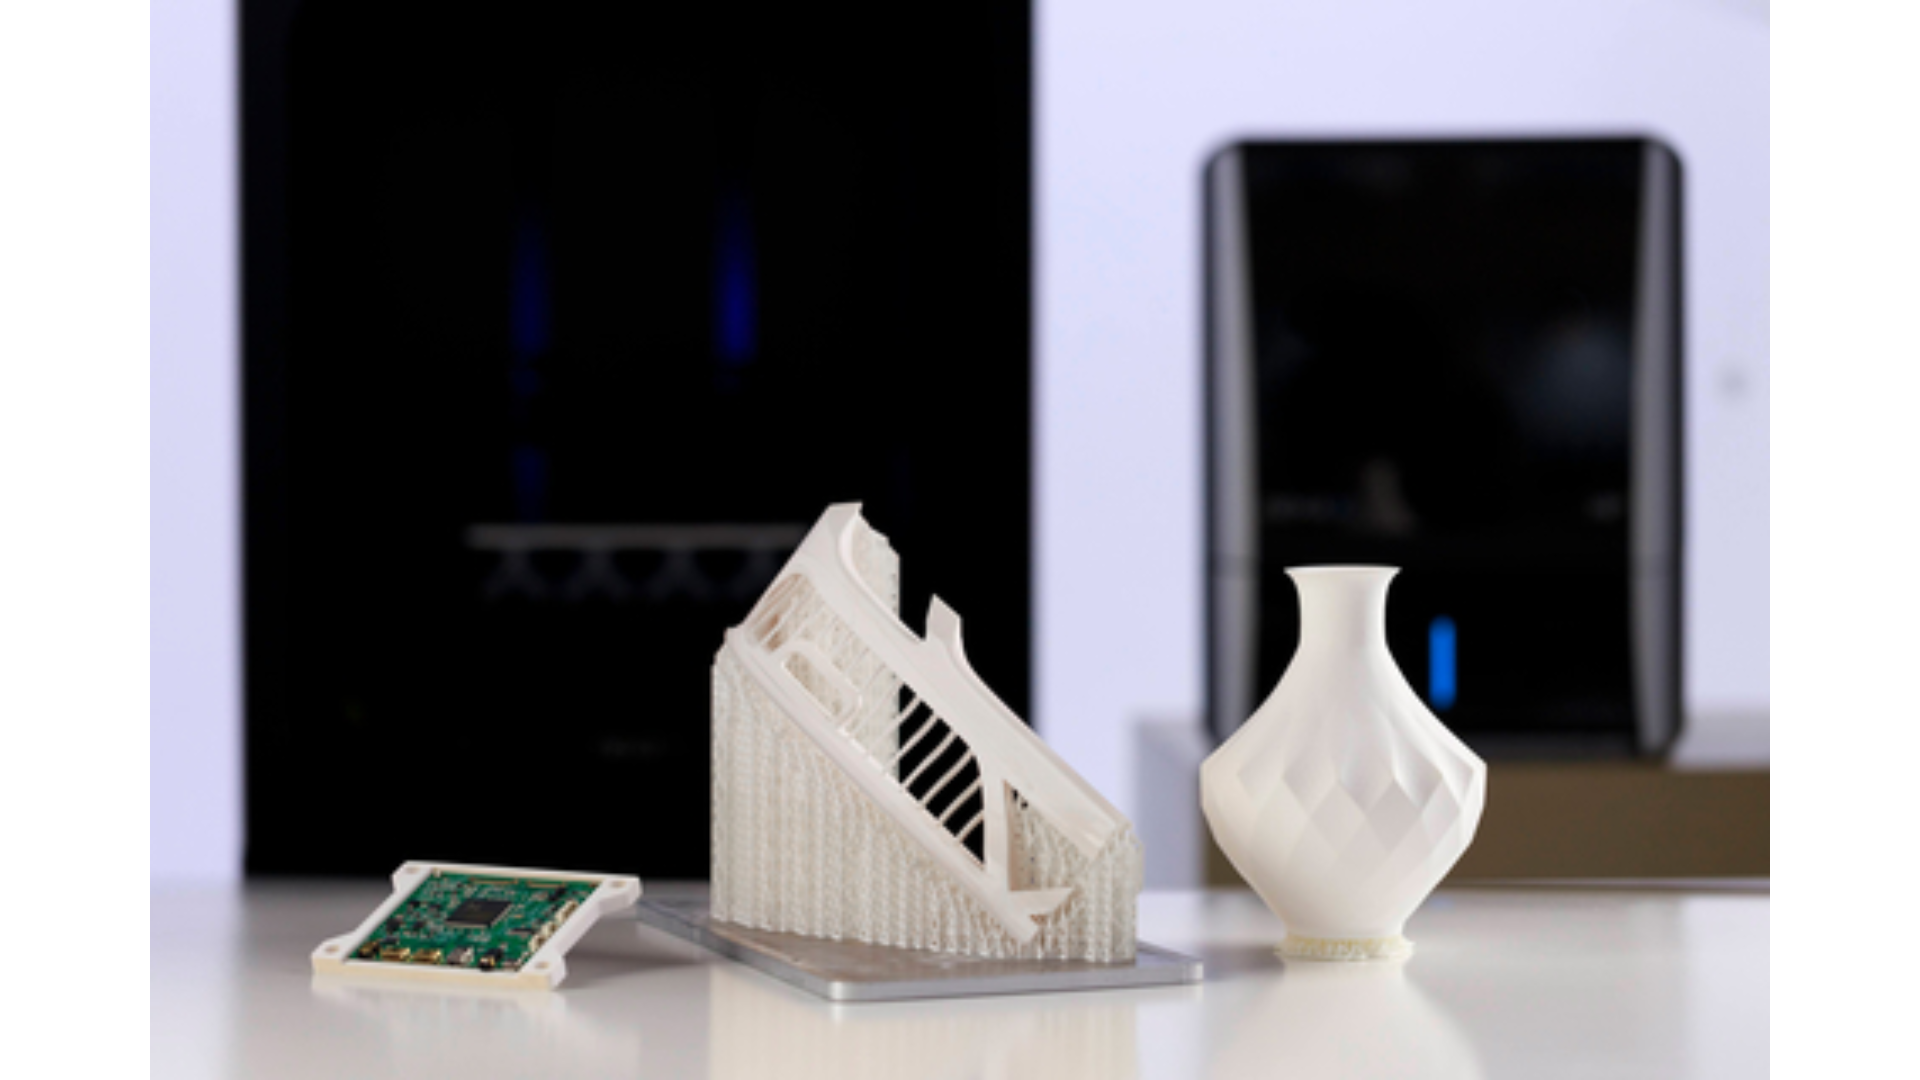 Nexa3D announced released three new photopolymer resins to address the growing demand for its ultrafast industrial and desktop 3D printers.